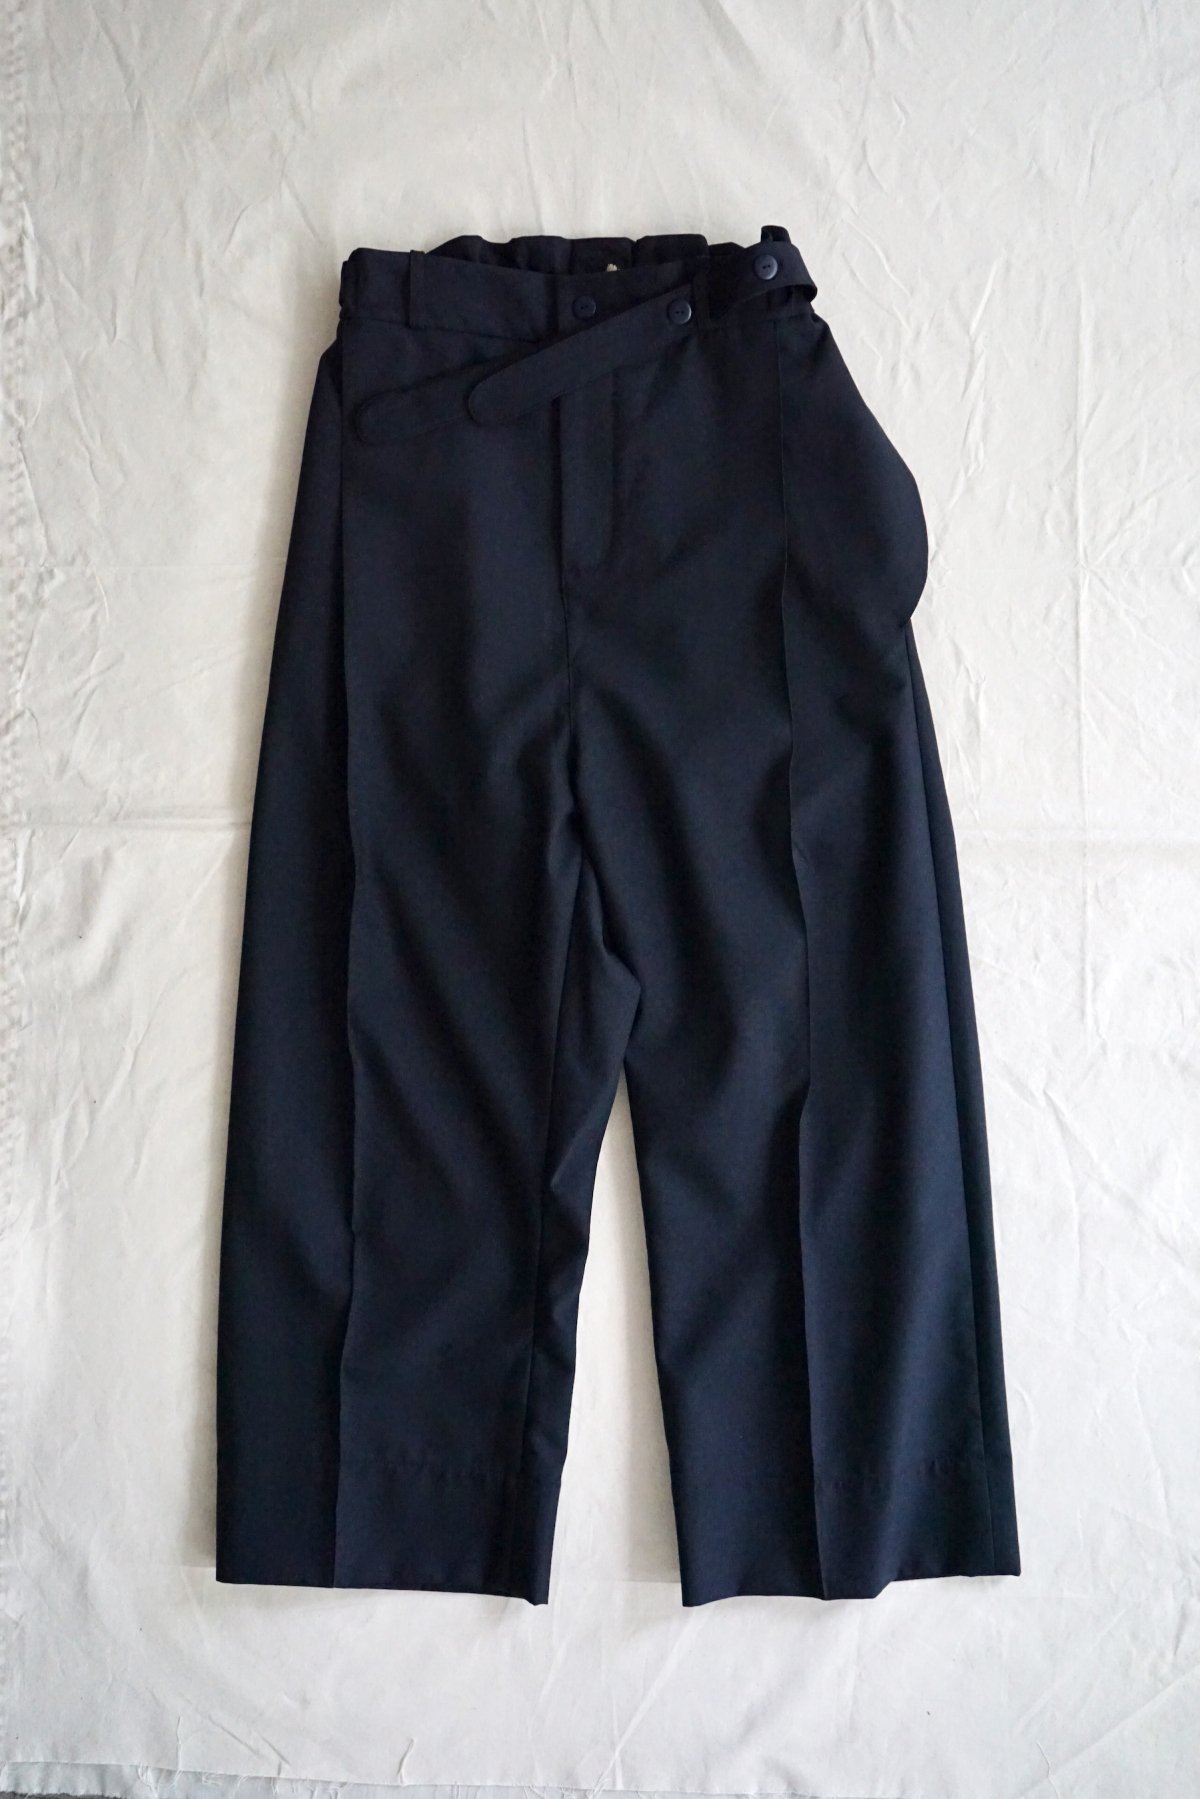 MAI GIDAH / Classic Elephant Ear’s Trousers with belt and straight-wide leg / Navy